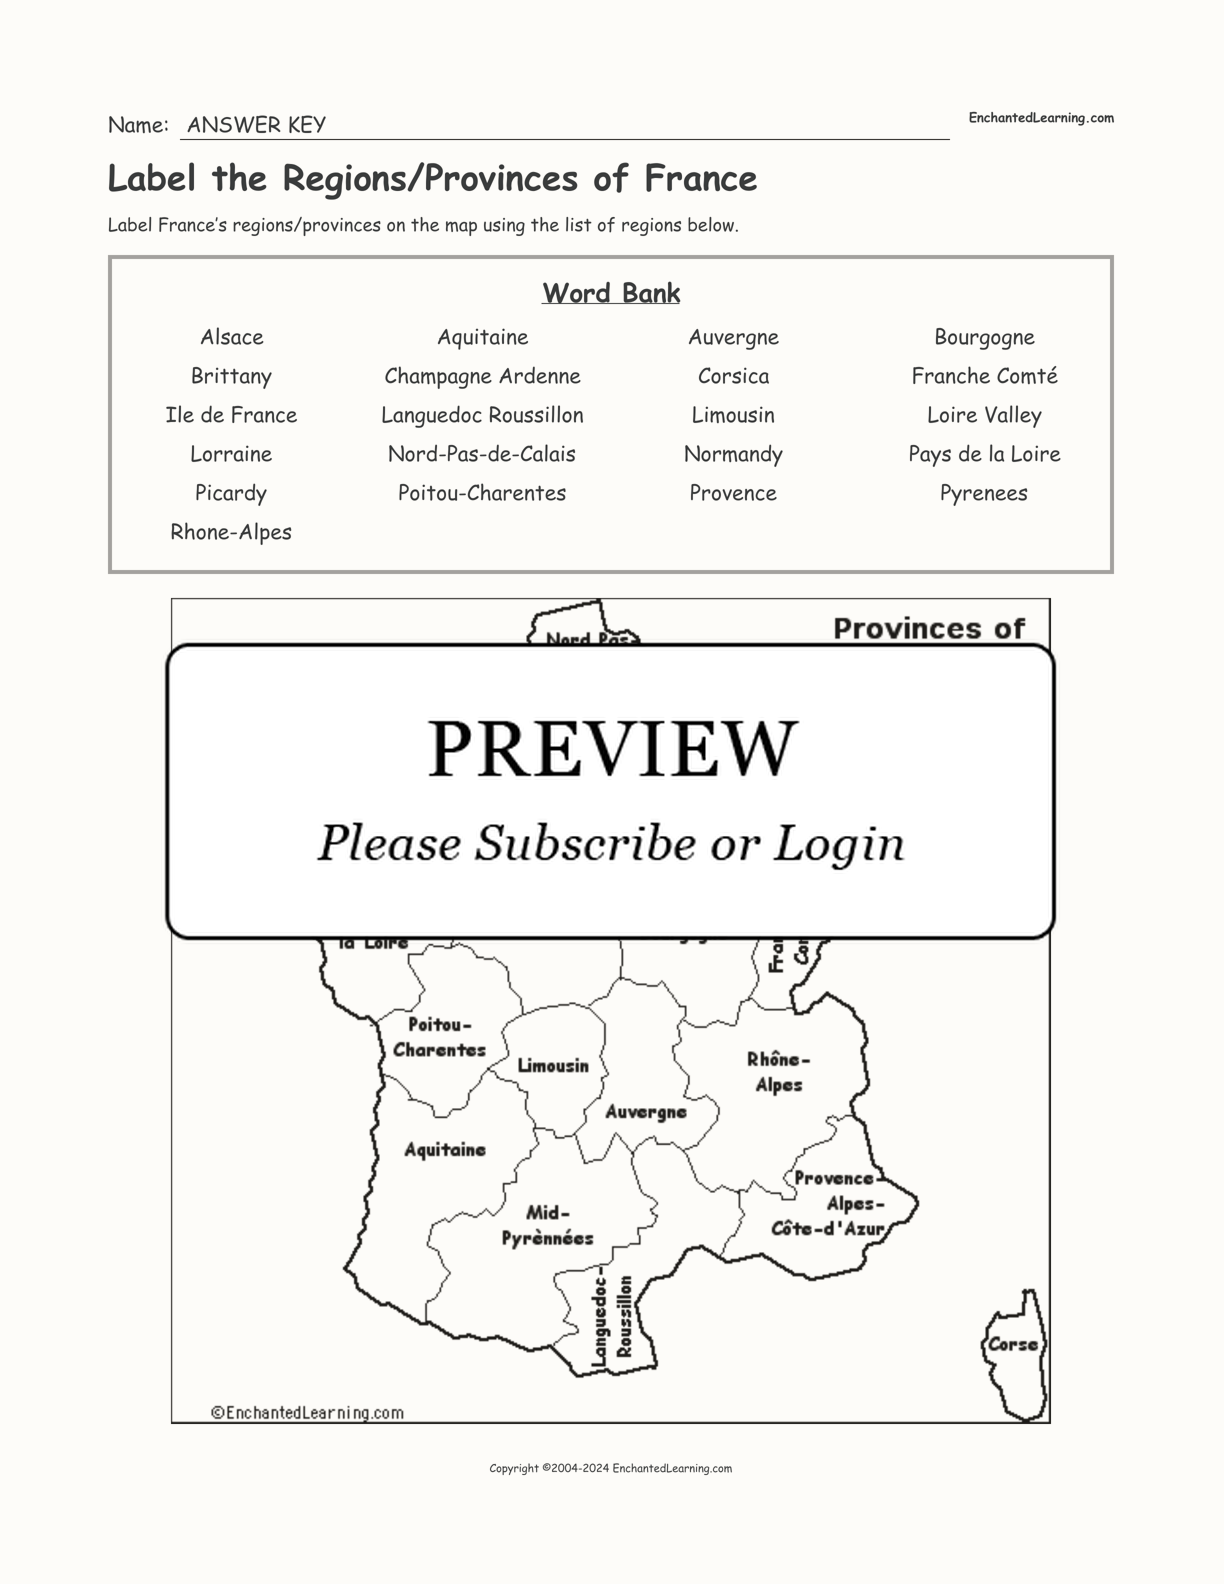 Label the Regions/Provinces of France interactive worksheet page 2